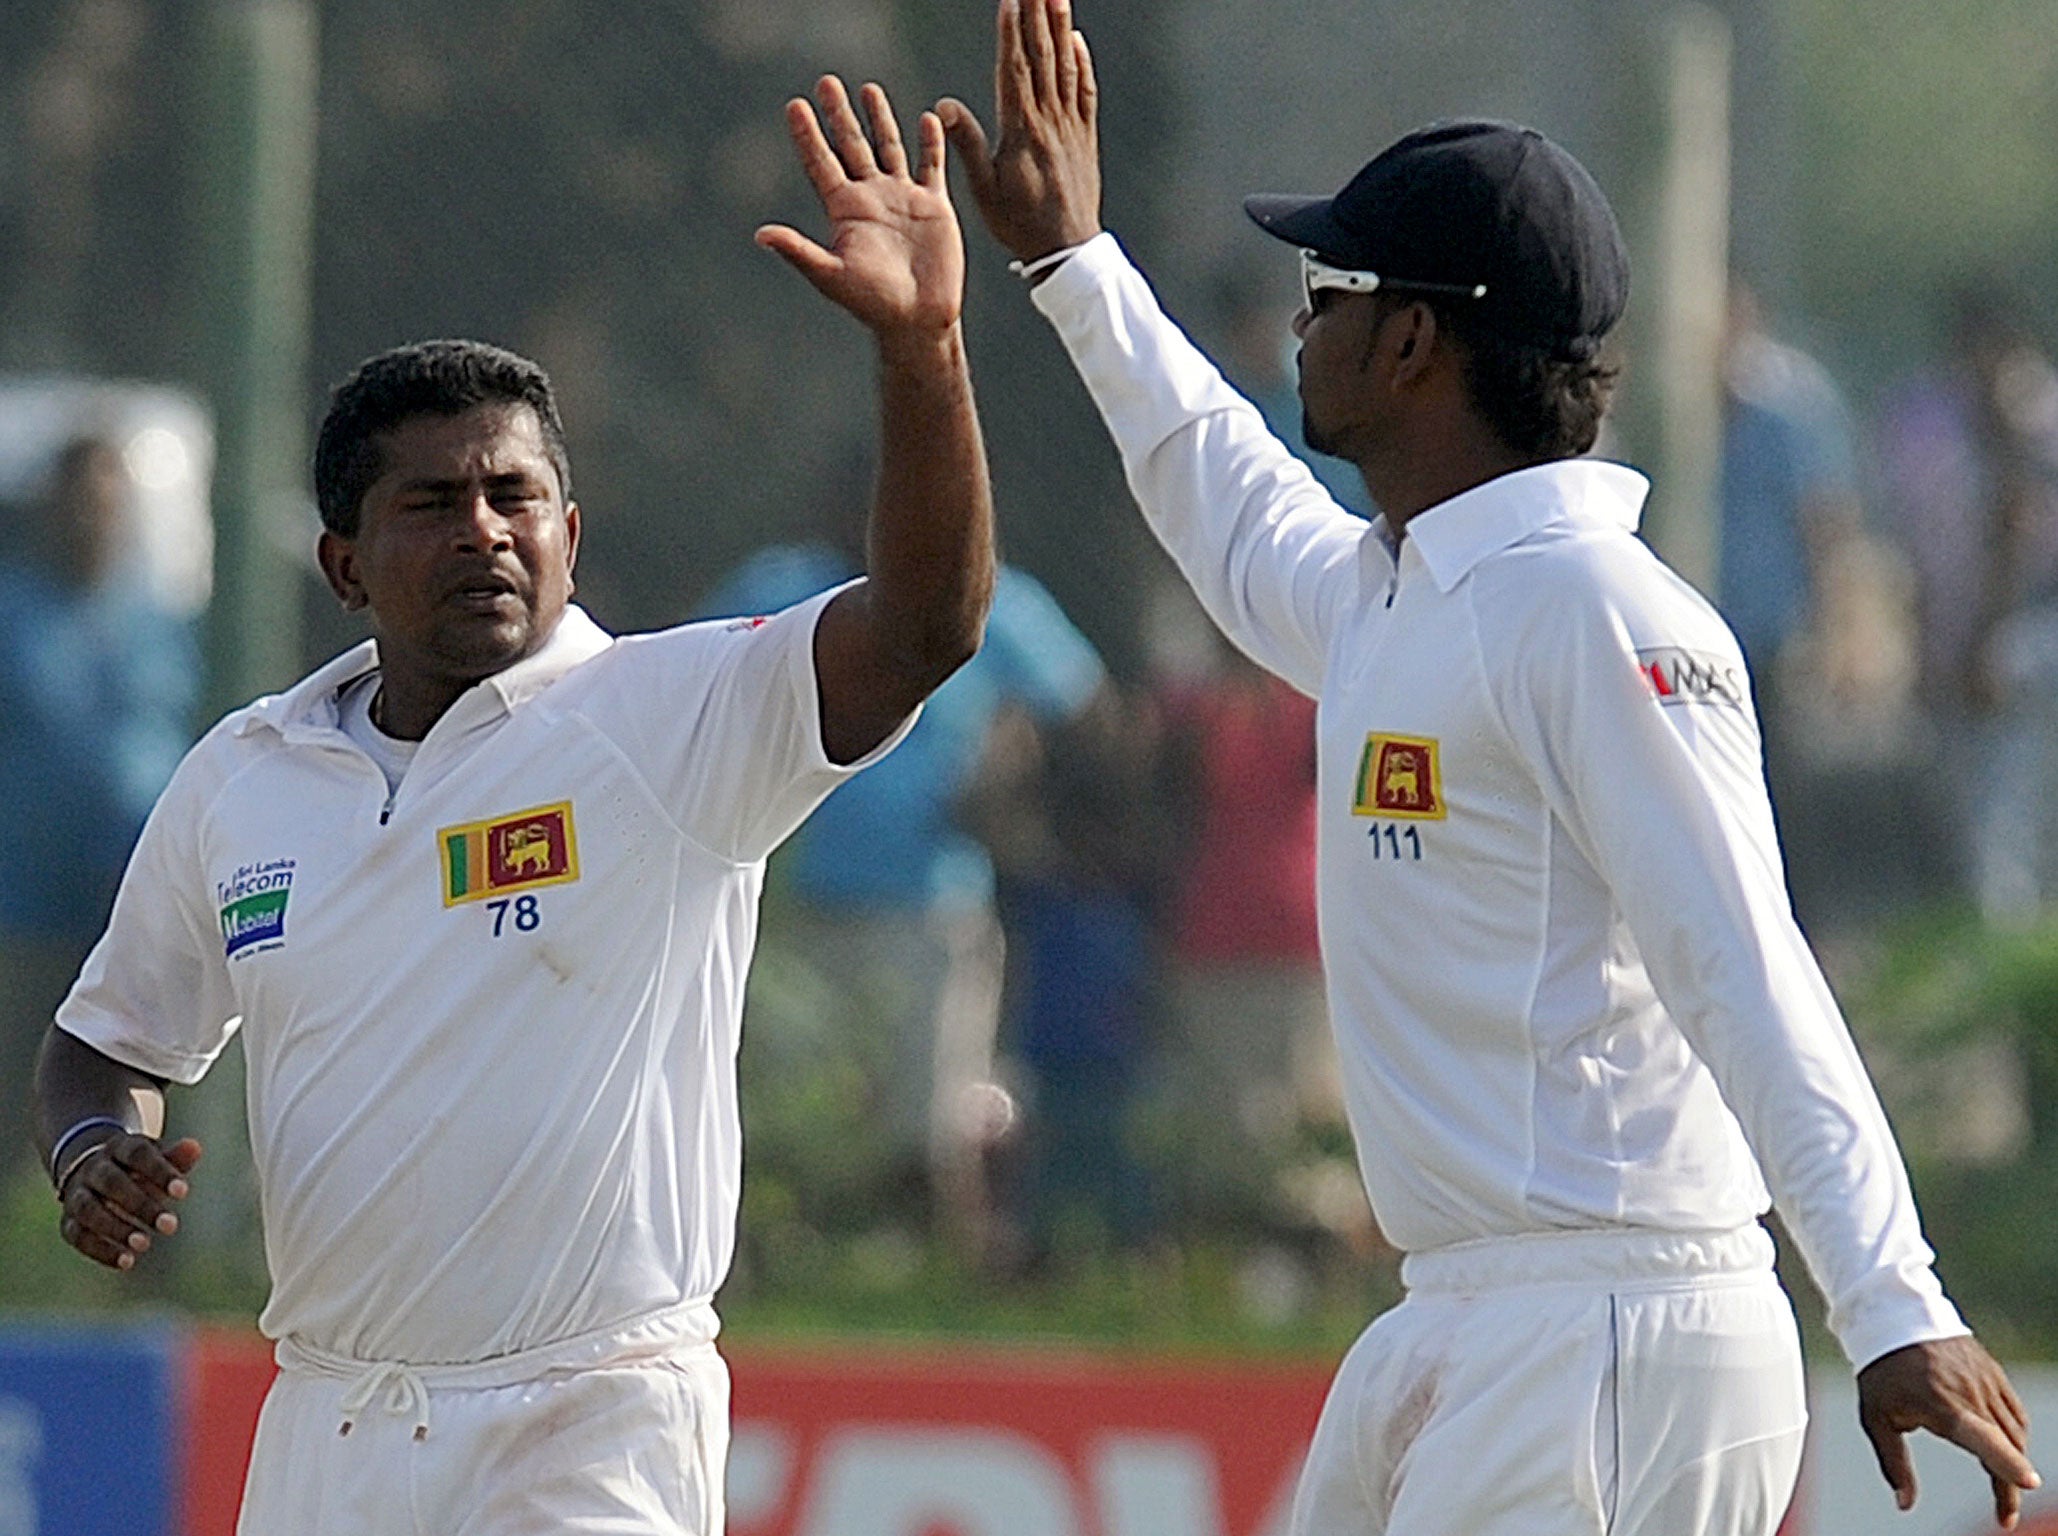 Rangana Herath (left) is probably the greatest left-arm bowler in history